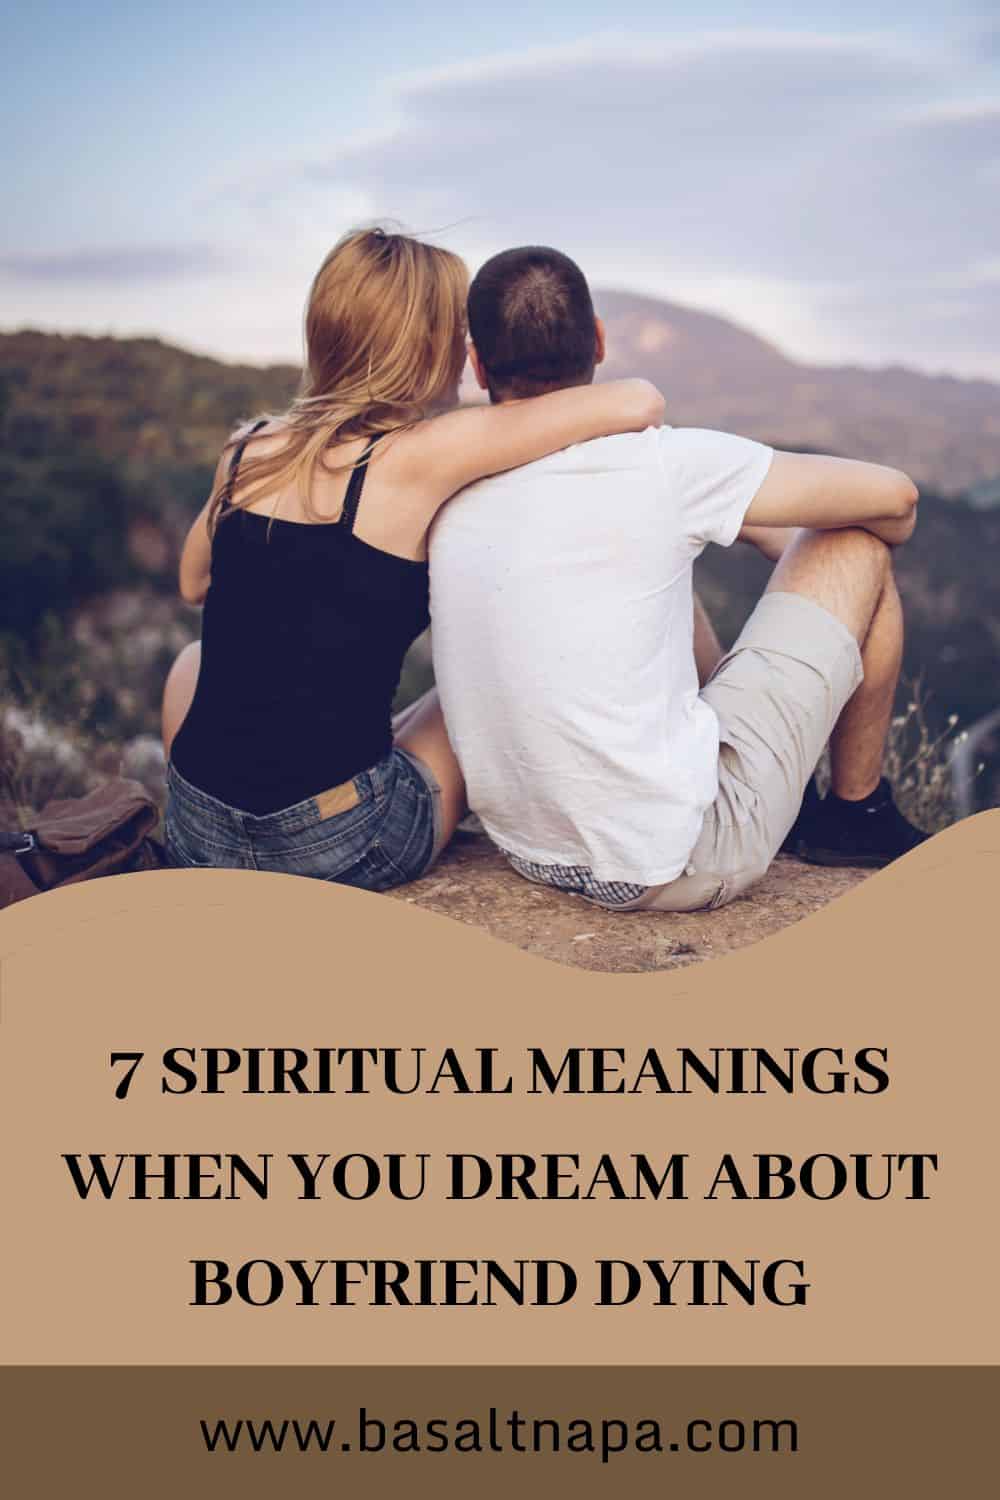 7 Spiritual Meanings When You Dream about Boyfriend Dying